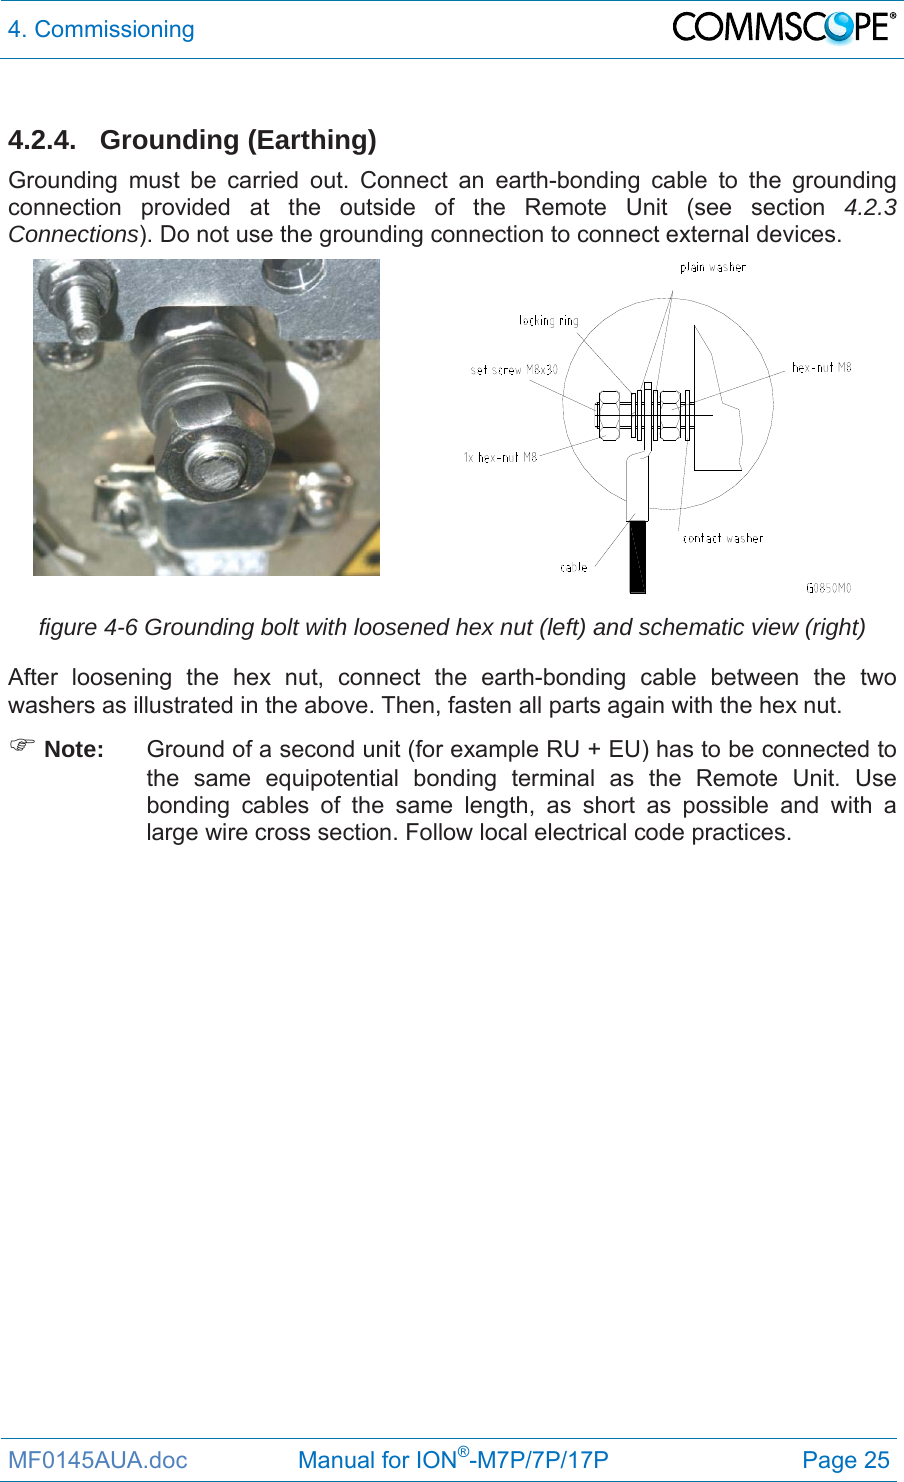 4. Commissioning  MF0145AUA.doc                 Manual for ION®-M7P/7P/17P Page 25  4.2.4. Grounding (Earthing)  Grounding must be carried out. Connect an earth-bonding cable to the grounding connection provided at the outside of the Remote Unit (see section 4.2.3 Connections). Do not use the grounding connection to connect external devices.   figure 4-6 Grounding bolt with loosened hex nut (left) and schematic view (right) After loosening the hex nut, connect the earth-bonding cable between the two washers as illustrated in the above. Then, fasten all parts again with the hex nut.  Note:  Ground of a second unit (for example RU + EU) has to be connected to the same equipotential bonding terminal as the Remote Unit. Use bonding cables of the same length, as short as possible and with a large wire cross section. Follow local electrical code practices. 